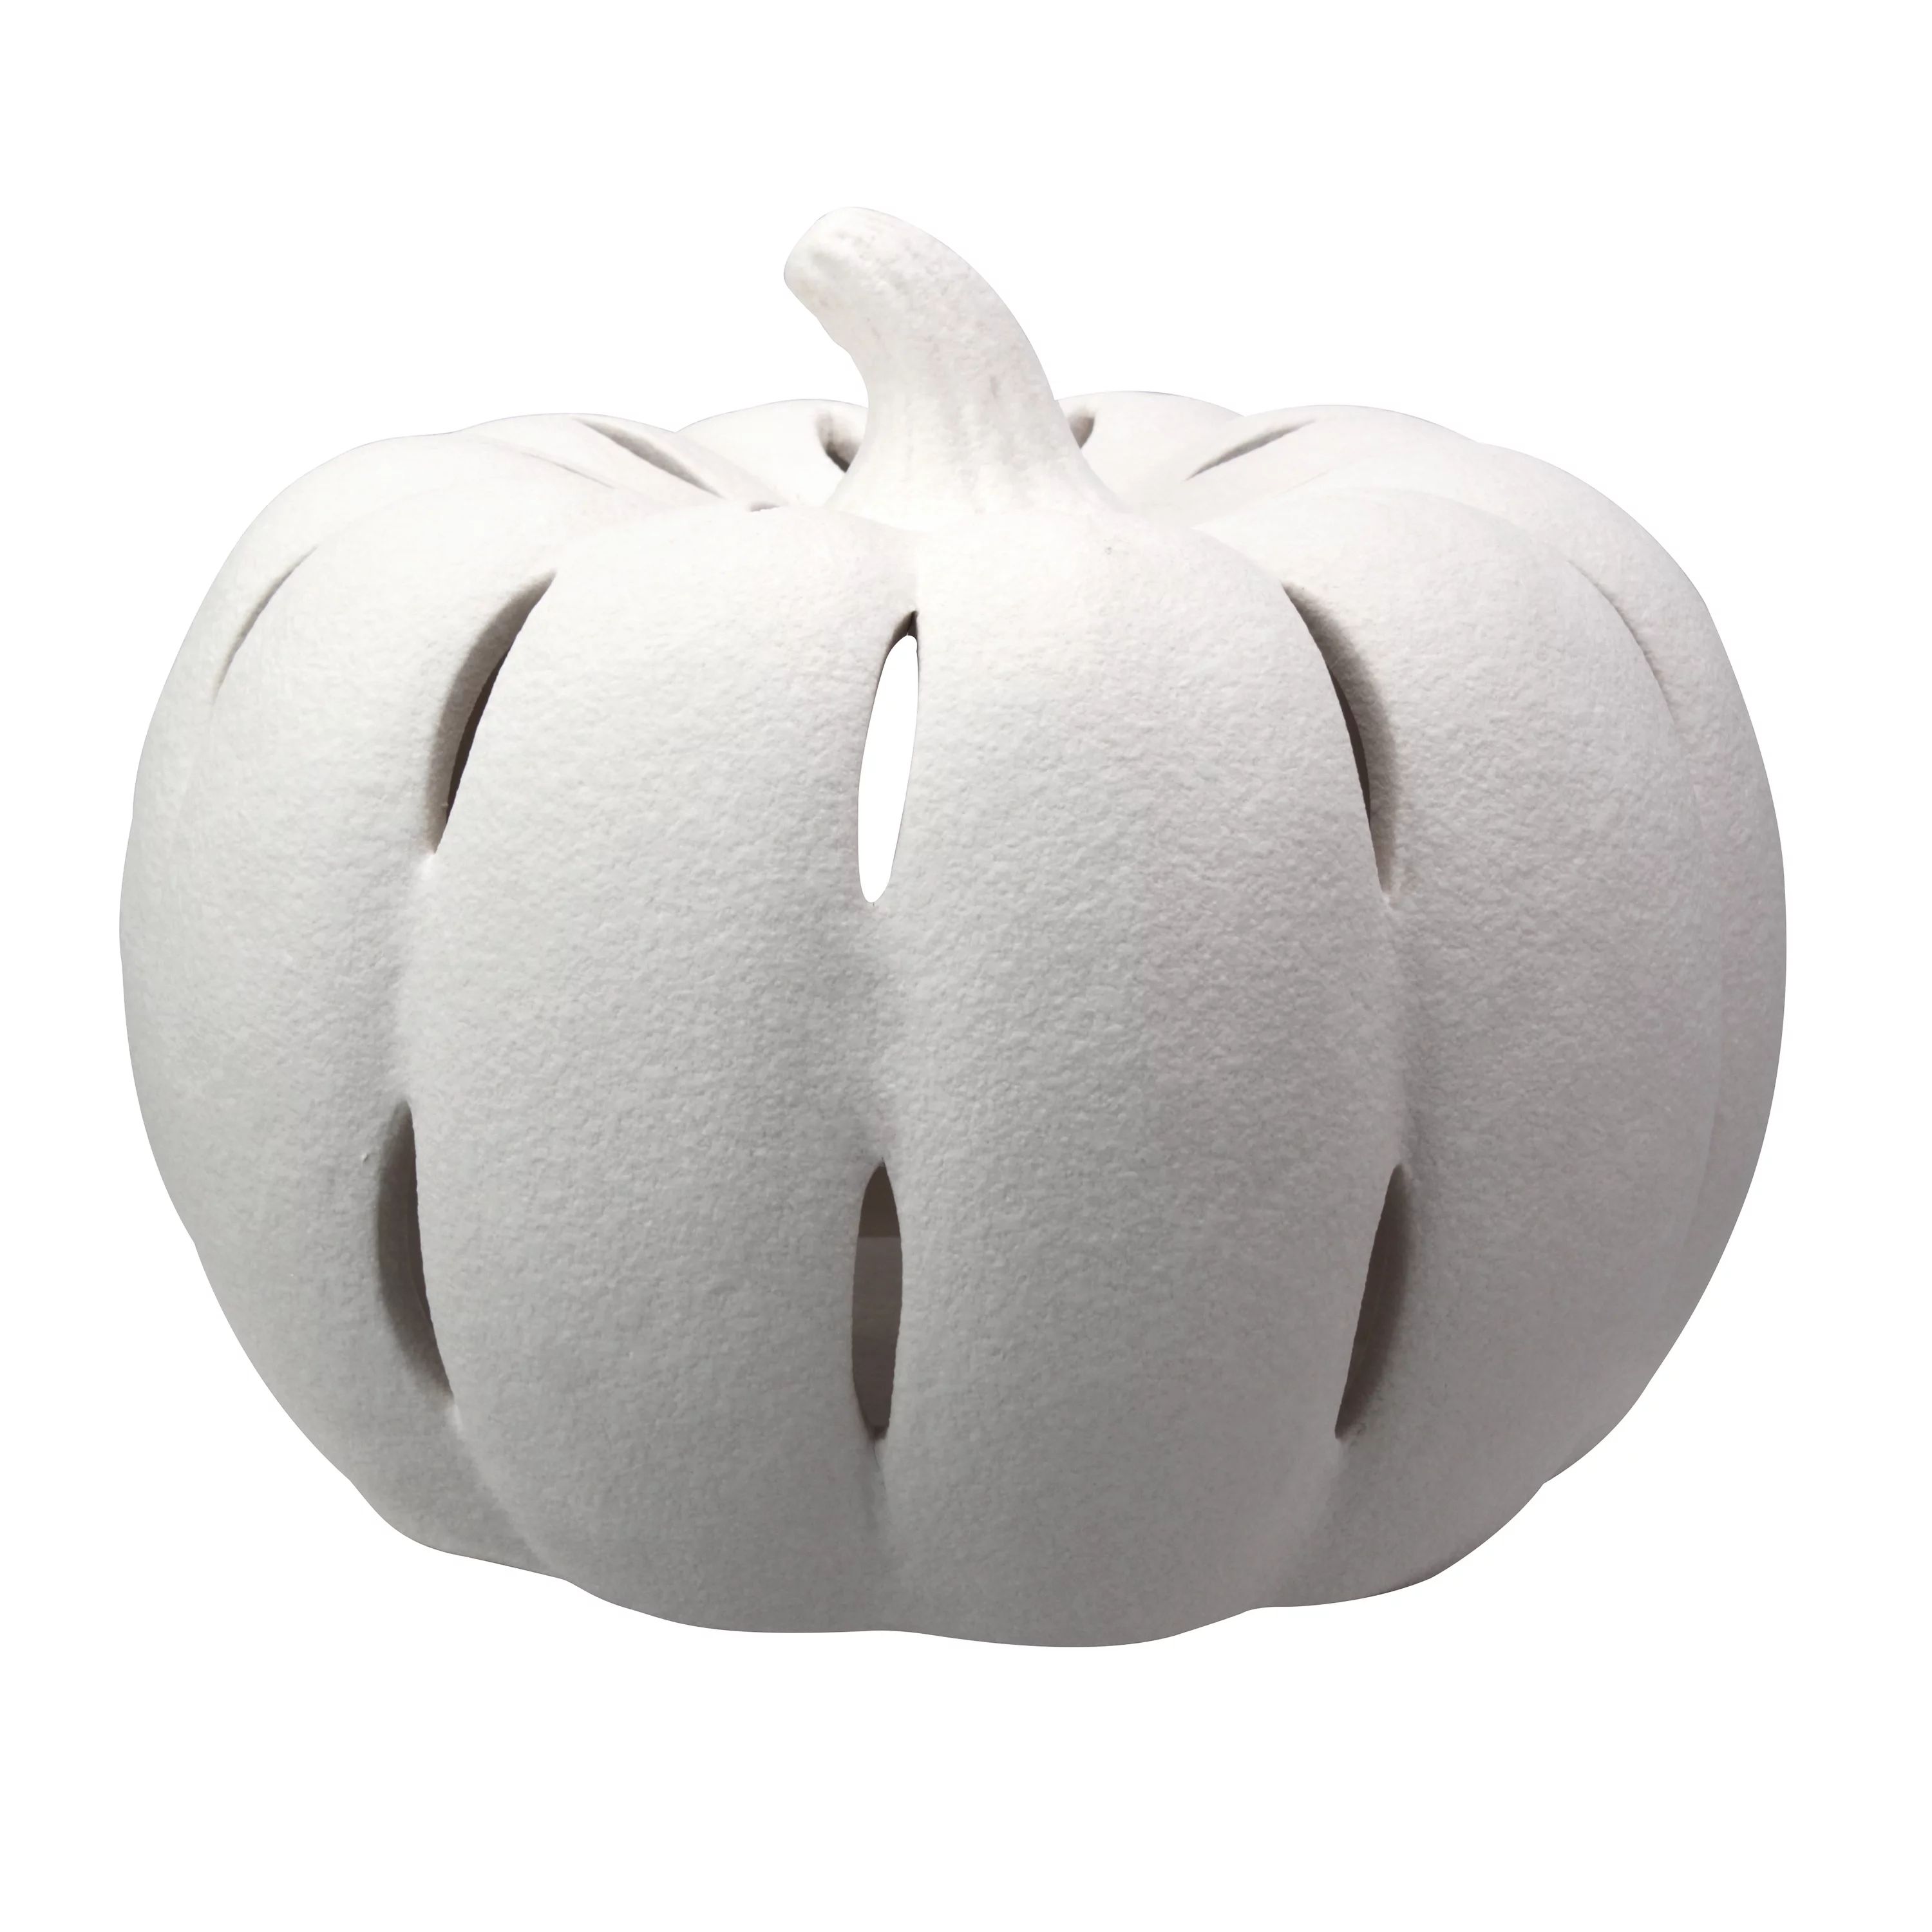 Better Homes and Gardens Ceramic Pumpkin Luminary Candle Holder, Large, White | Walmart (US)